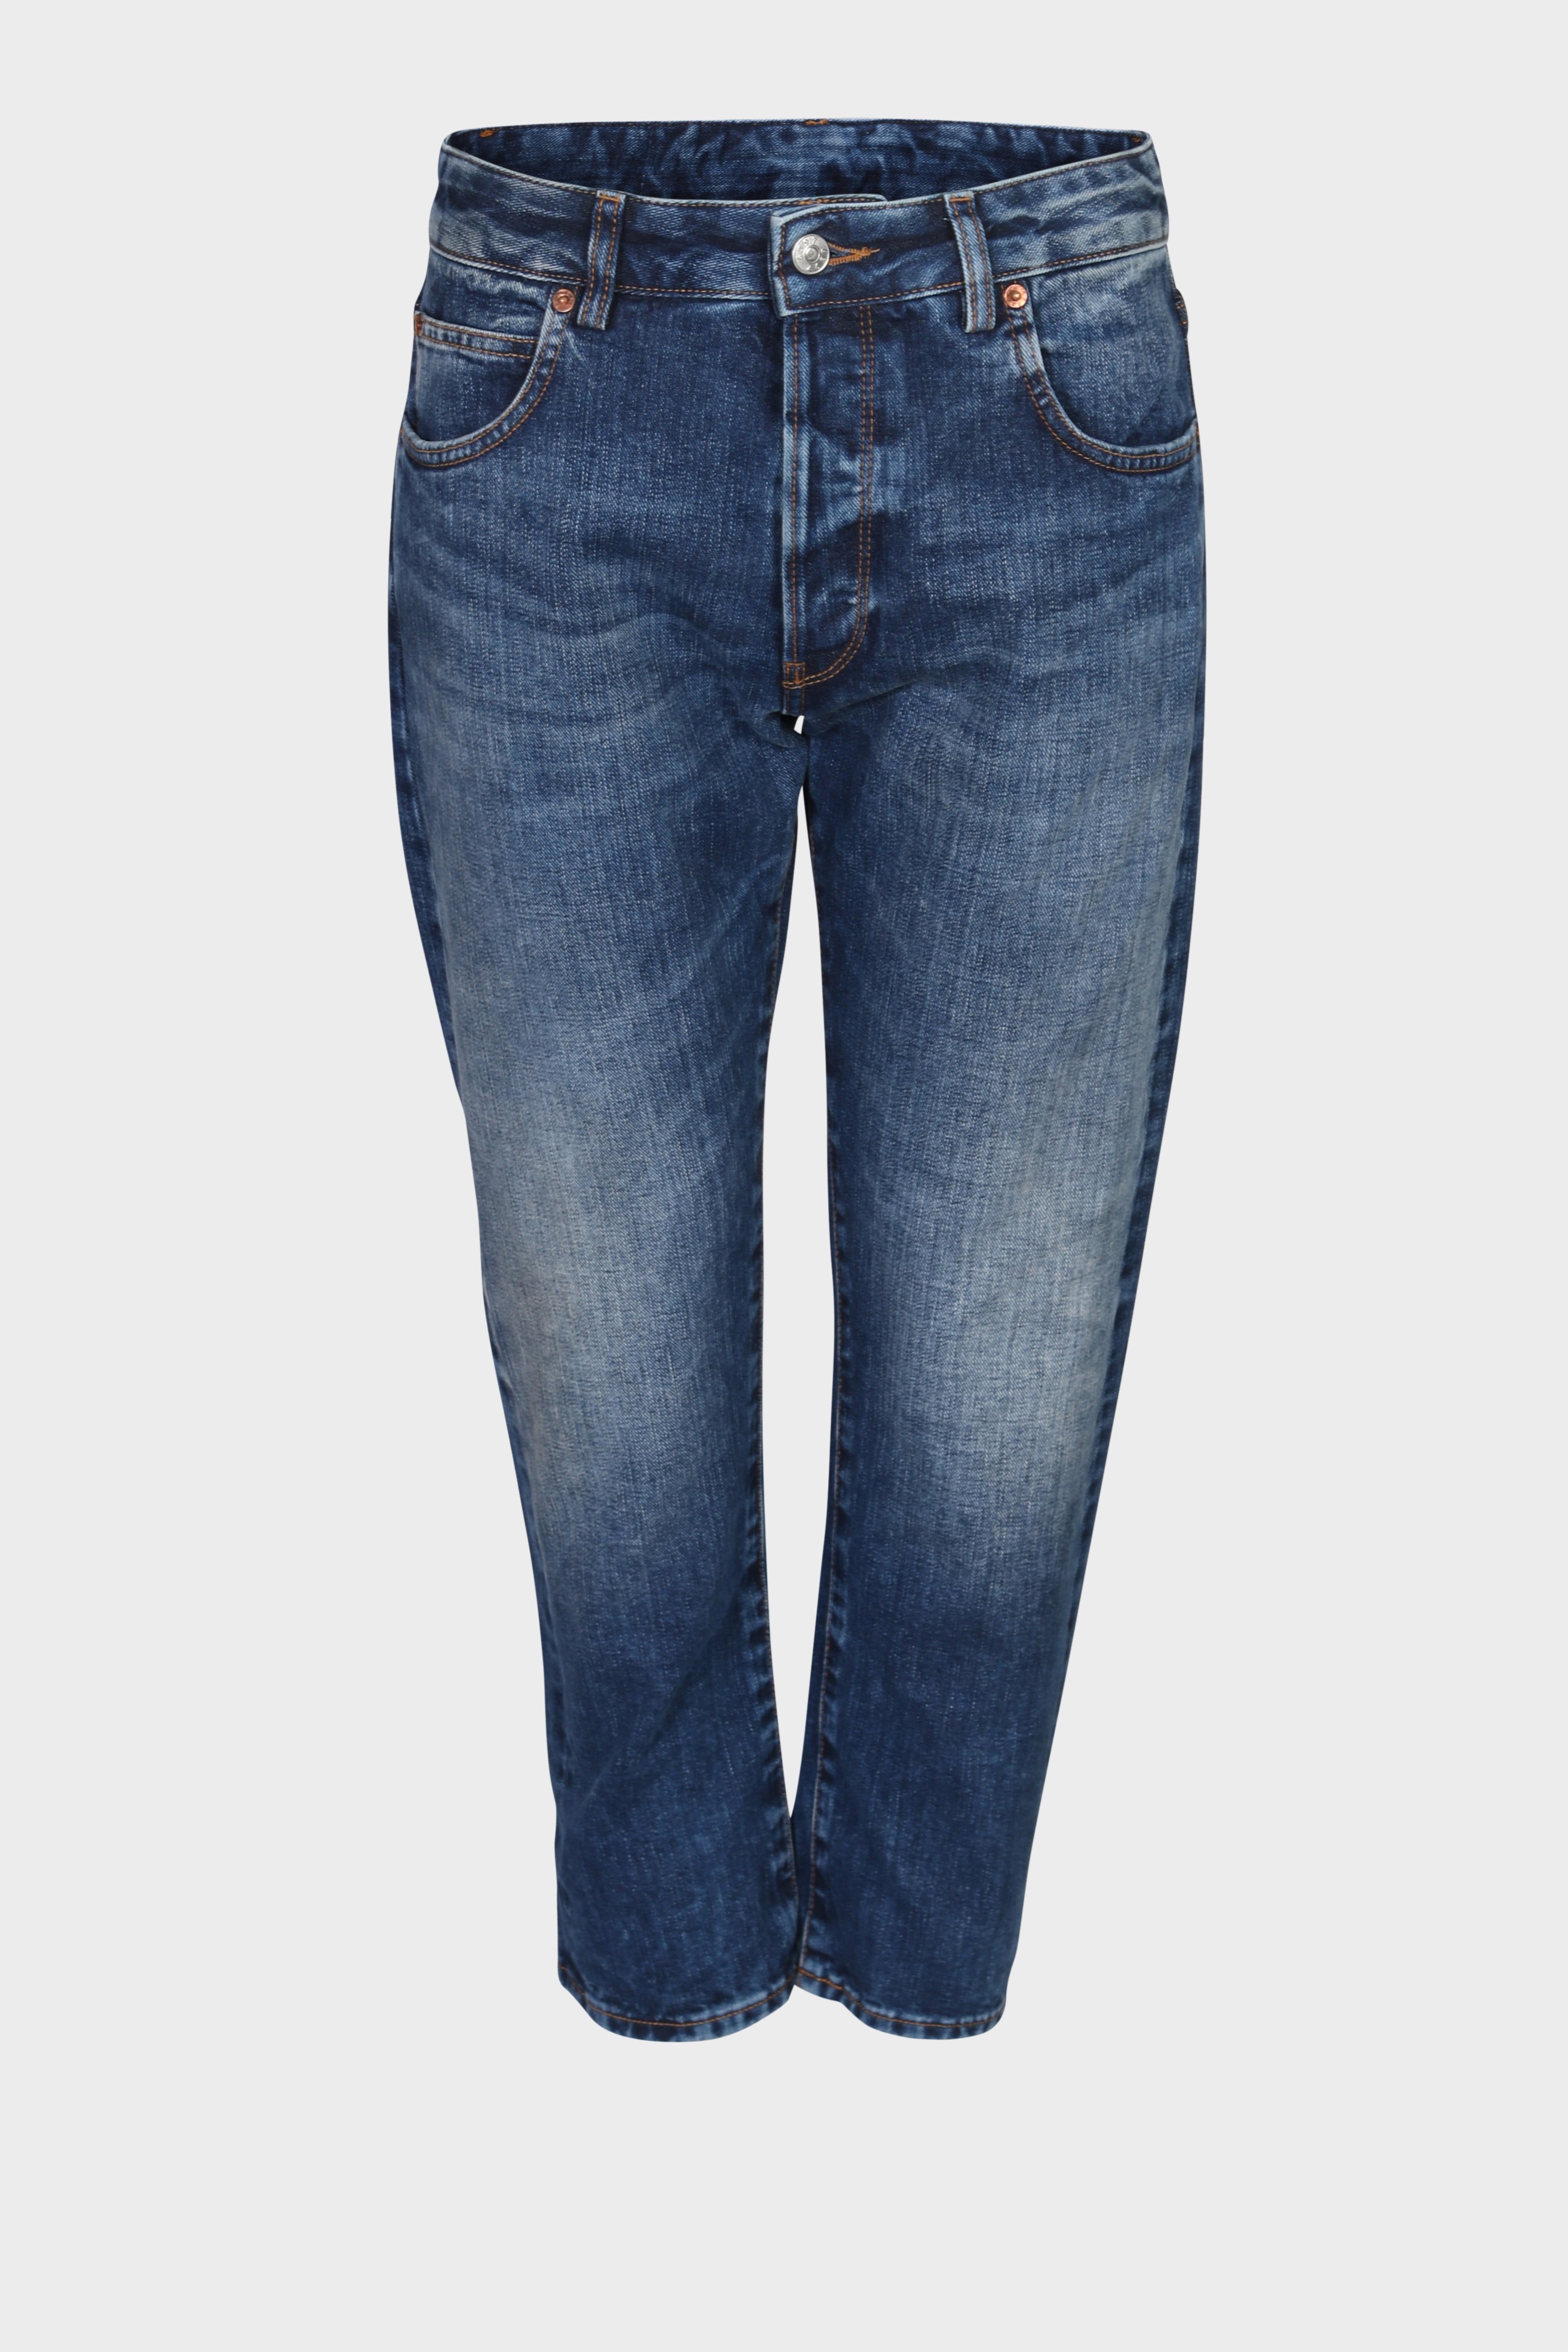 6397 Shorty Jeans in Hi-Contrast Blue 25